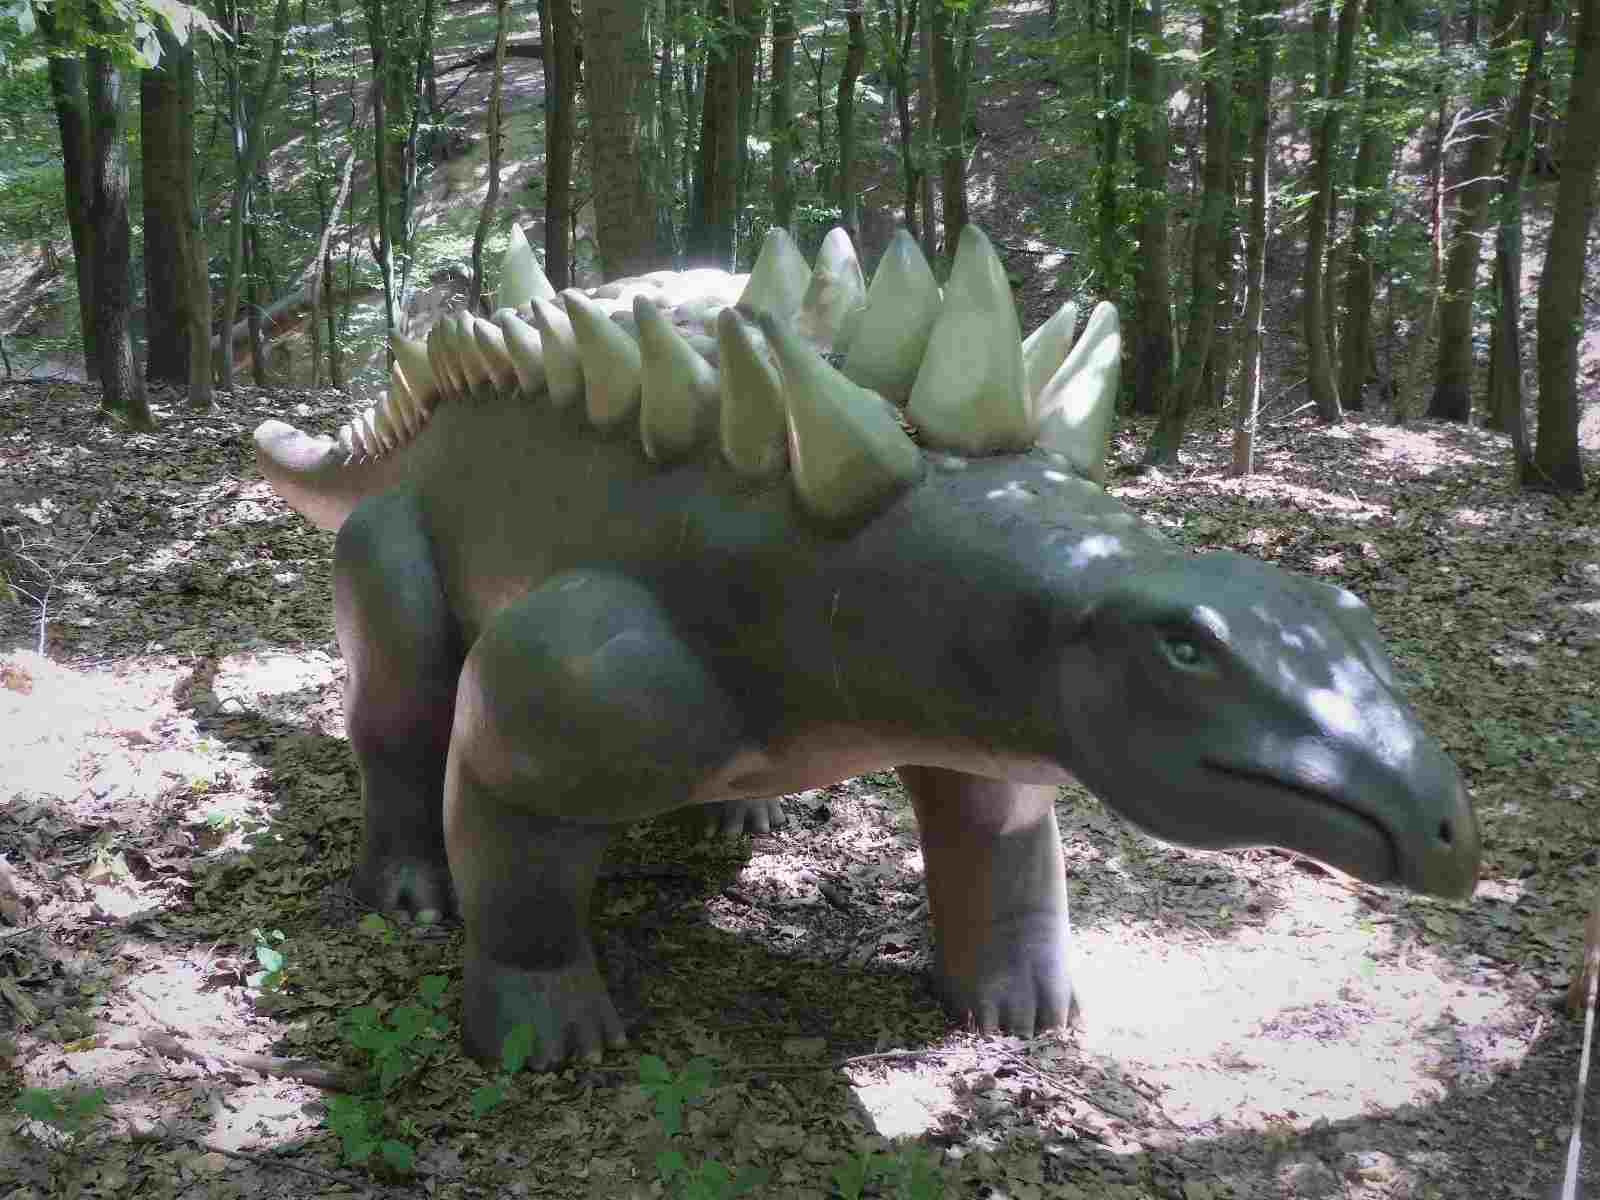 Know all about Hungarosaurus habitat and size.